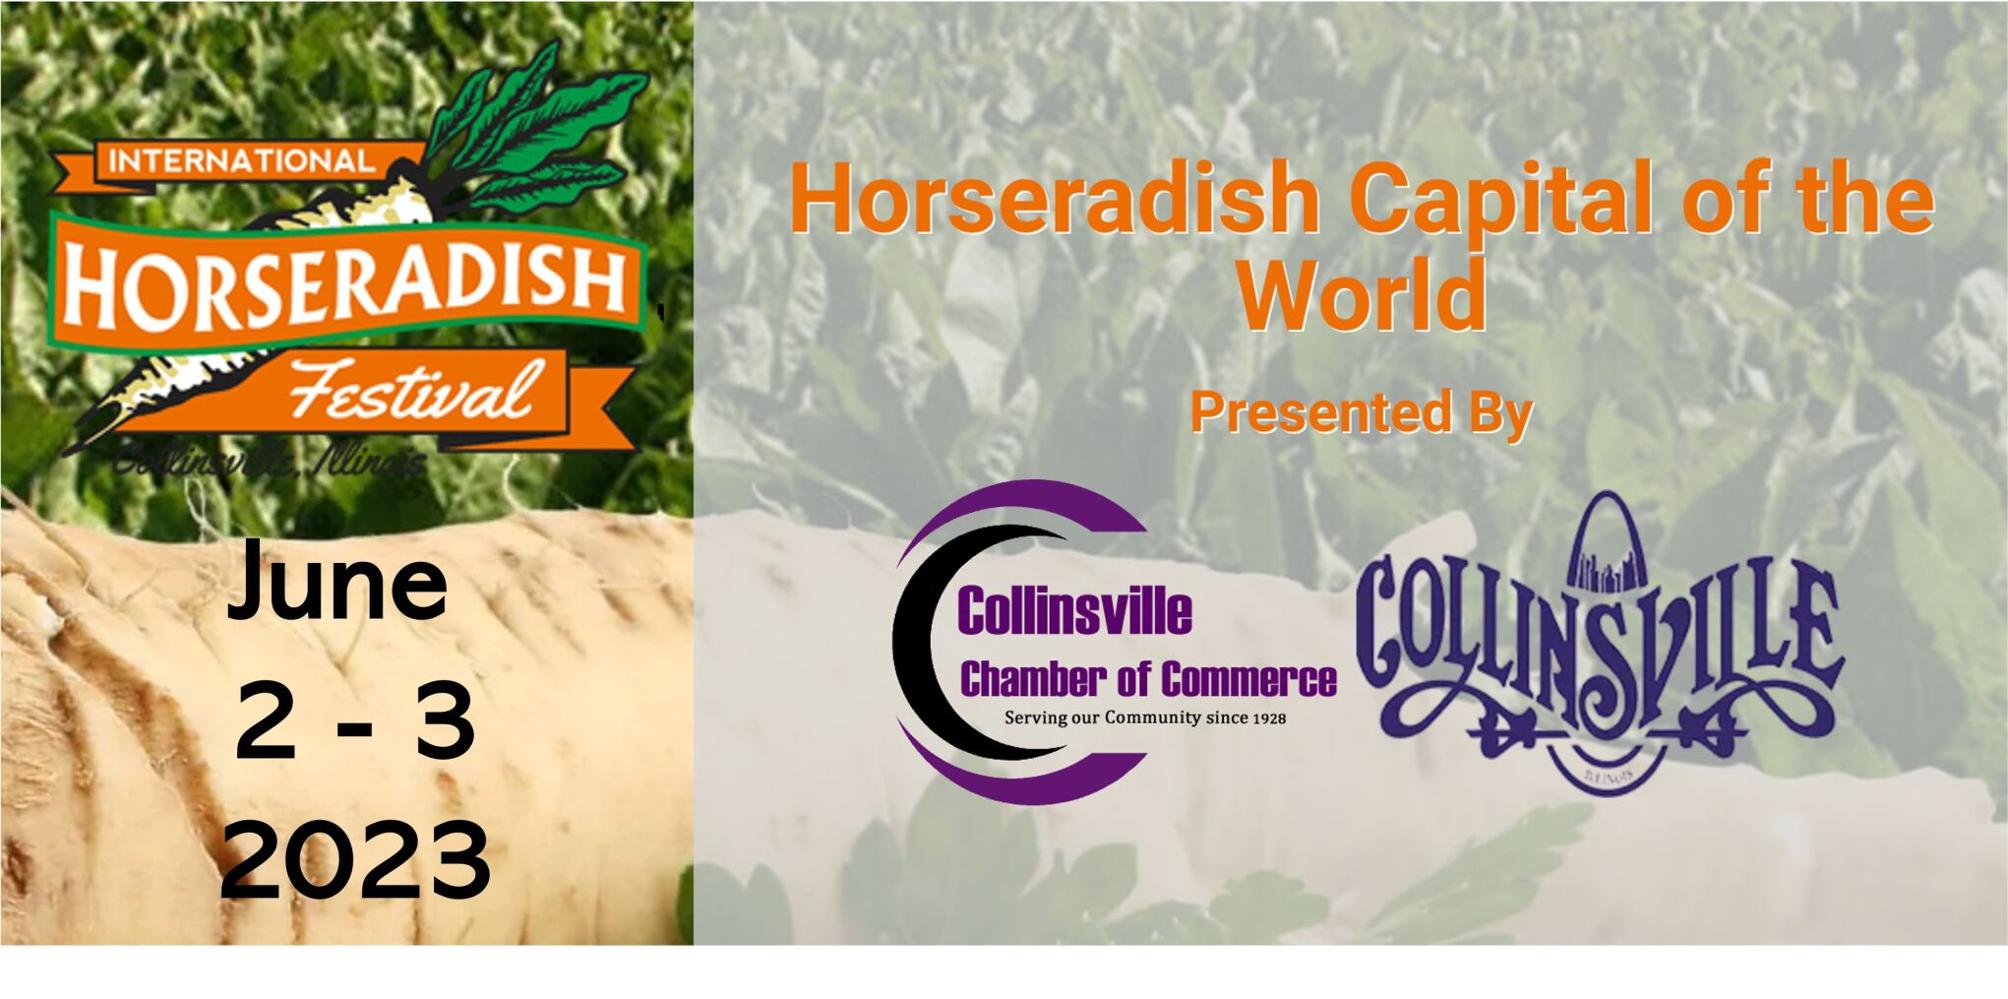 Horseradish Festival Activities Start Today at 1100am. Don't miss the